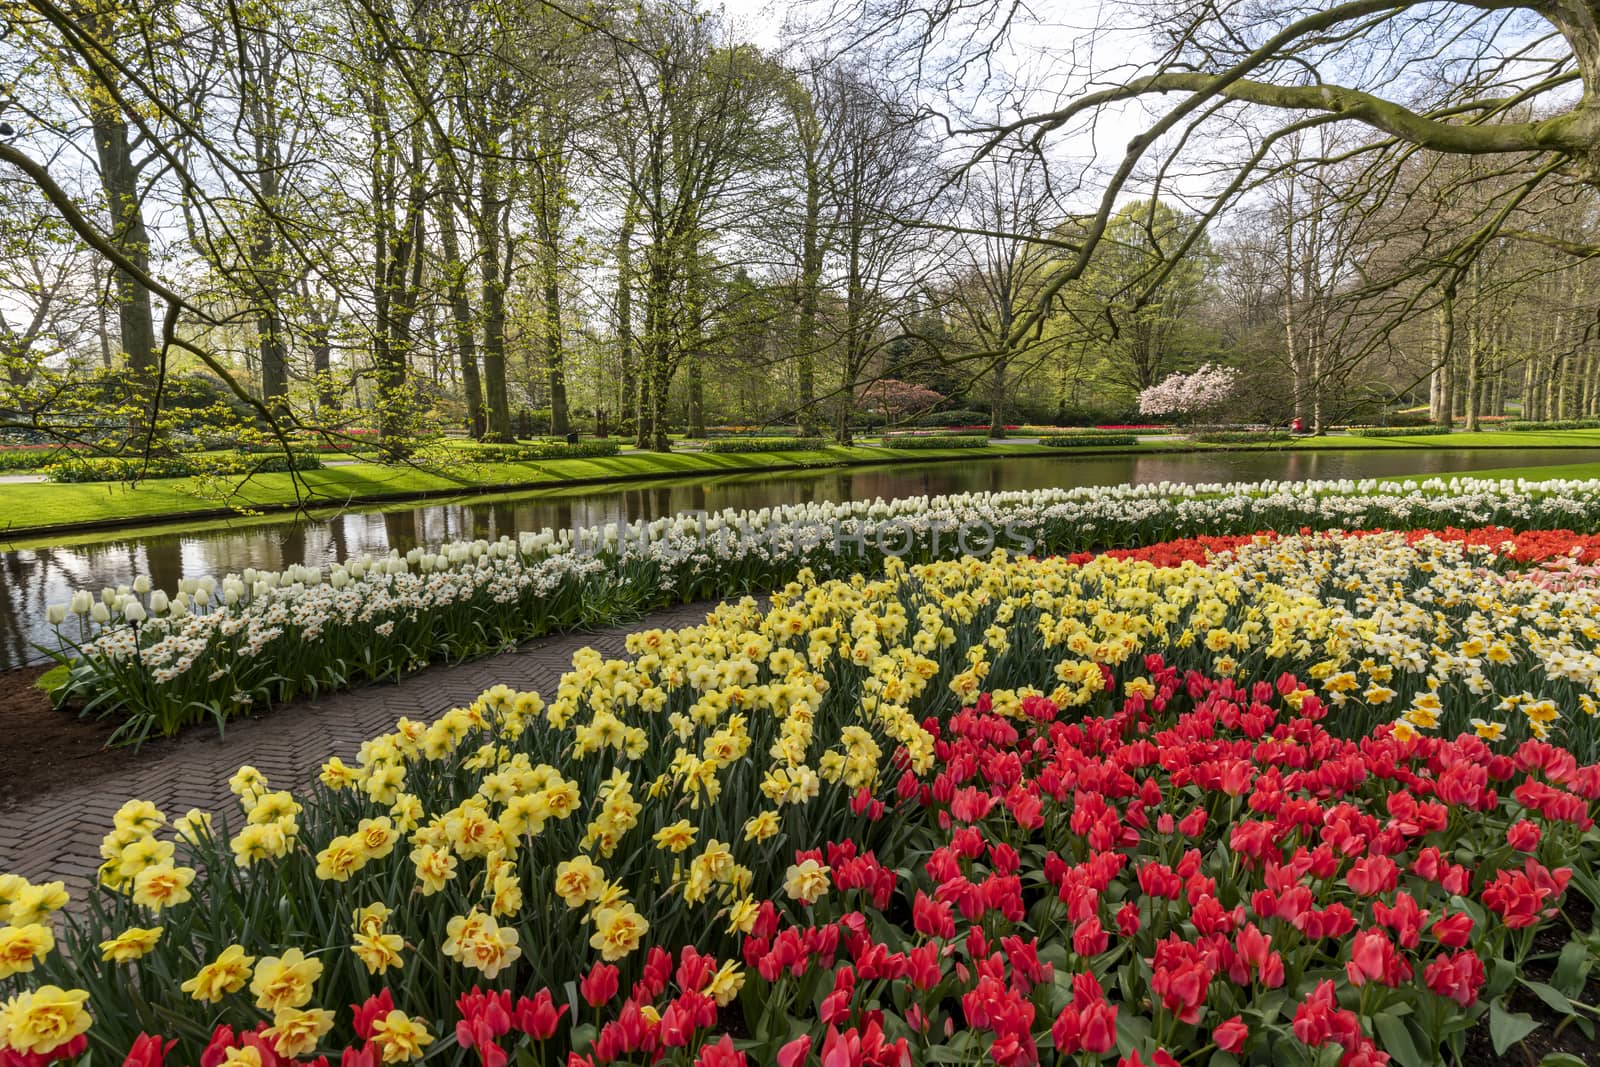 Yellow Daffodil and multi color tulips blossom blooming under a very well maintained garden in spring time